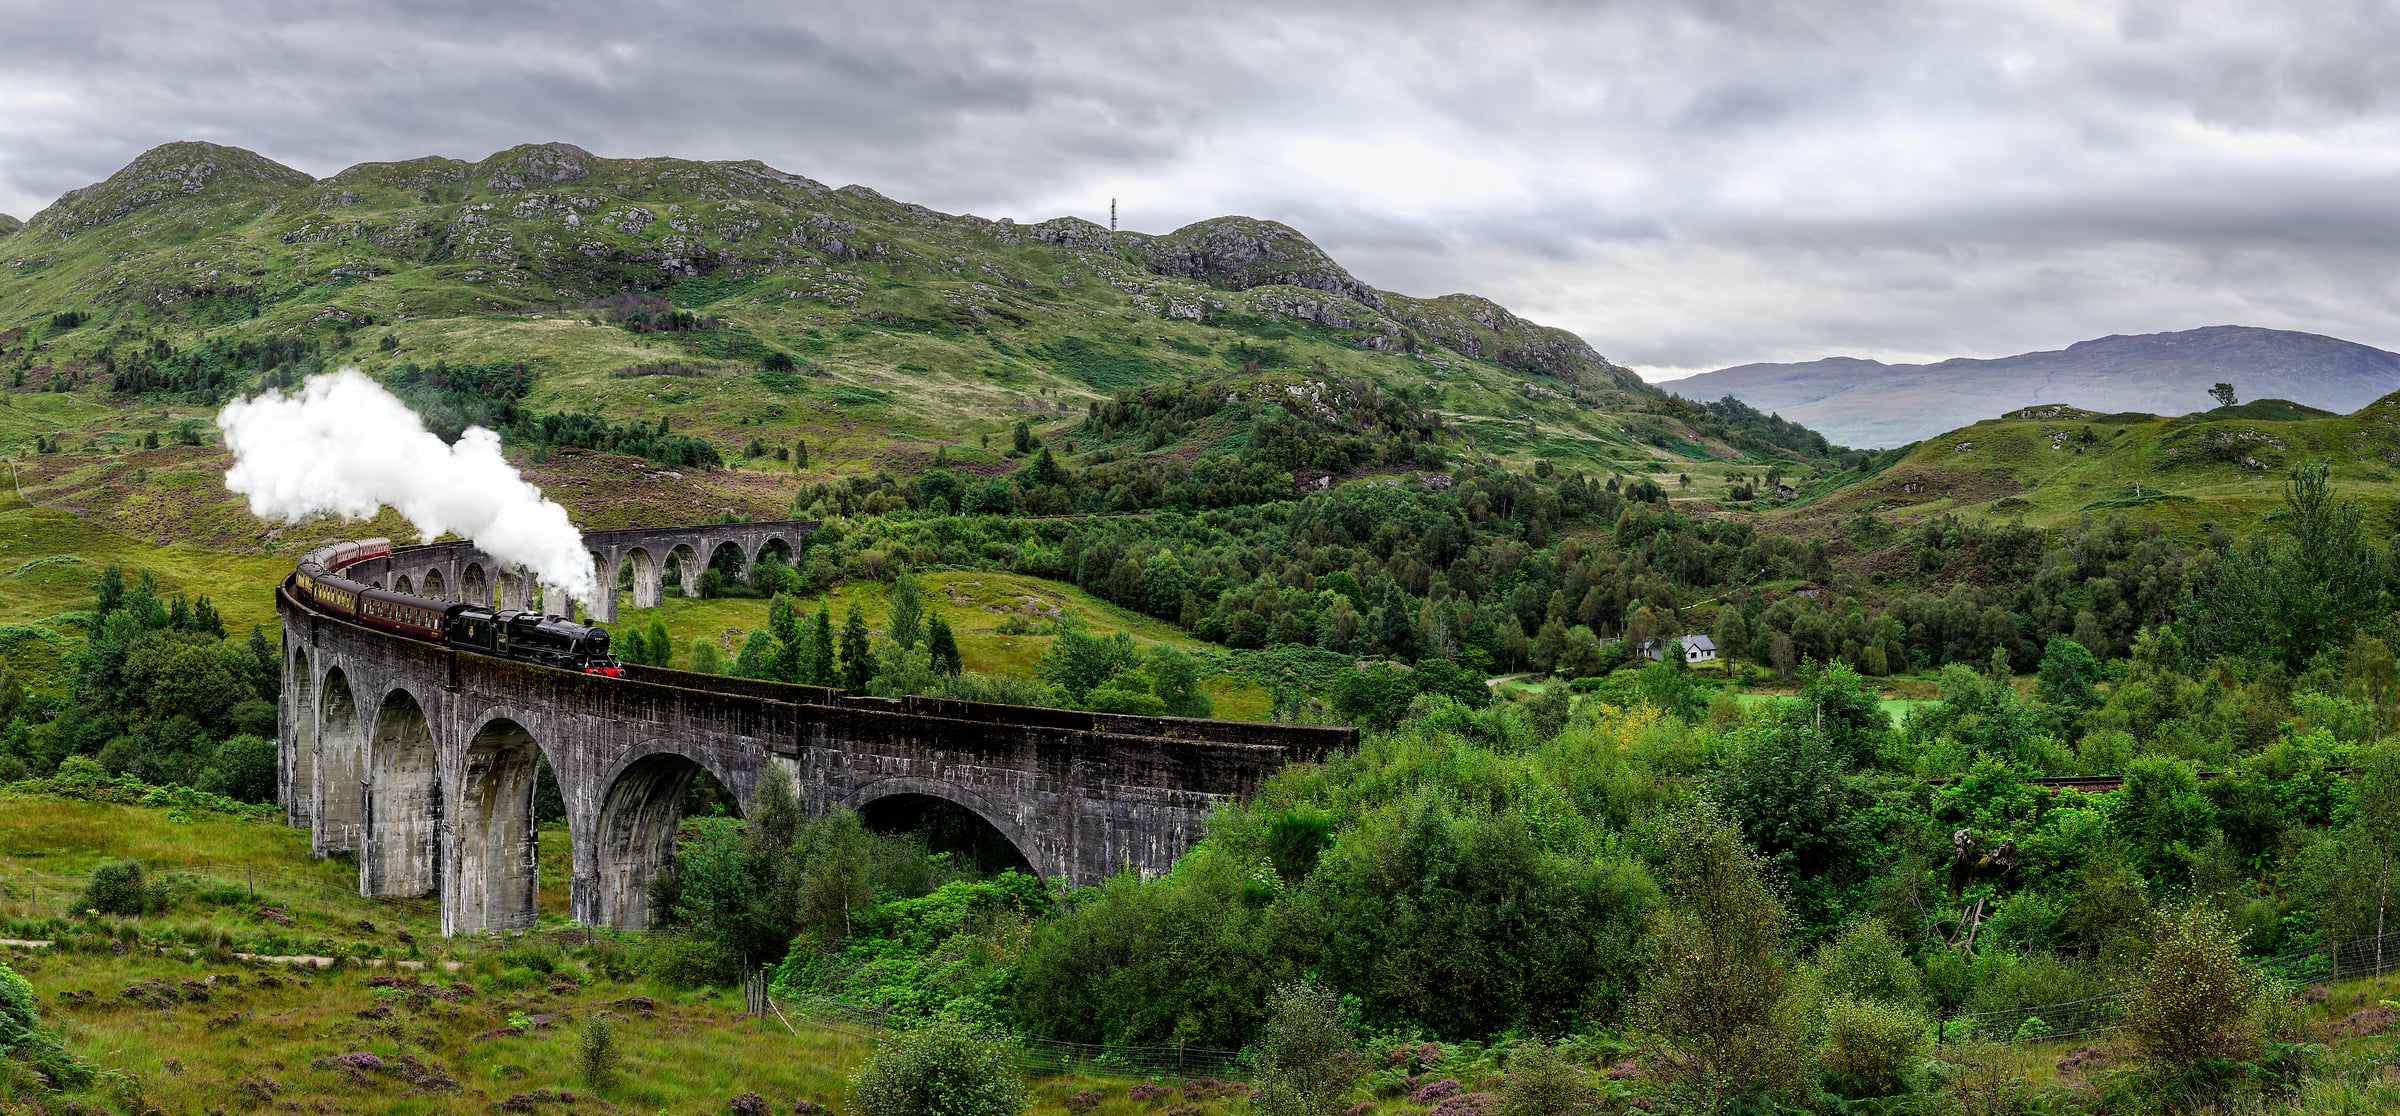 1,531 megapixels! A very high resolution, large-format VAST photo print of the Jacobite railroad train steam locomotive going across the Glenfinnan Viaduct bridge; photograph created by Scott Dimond in Glenfinnan Viaduct, United Kingdom.